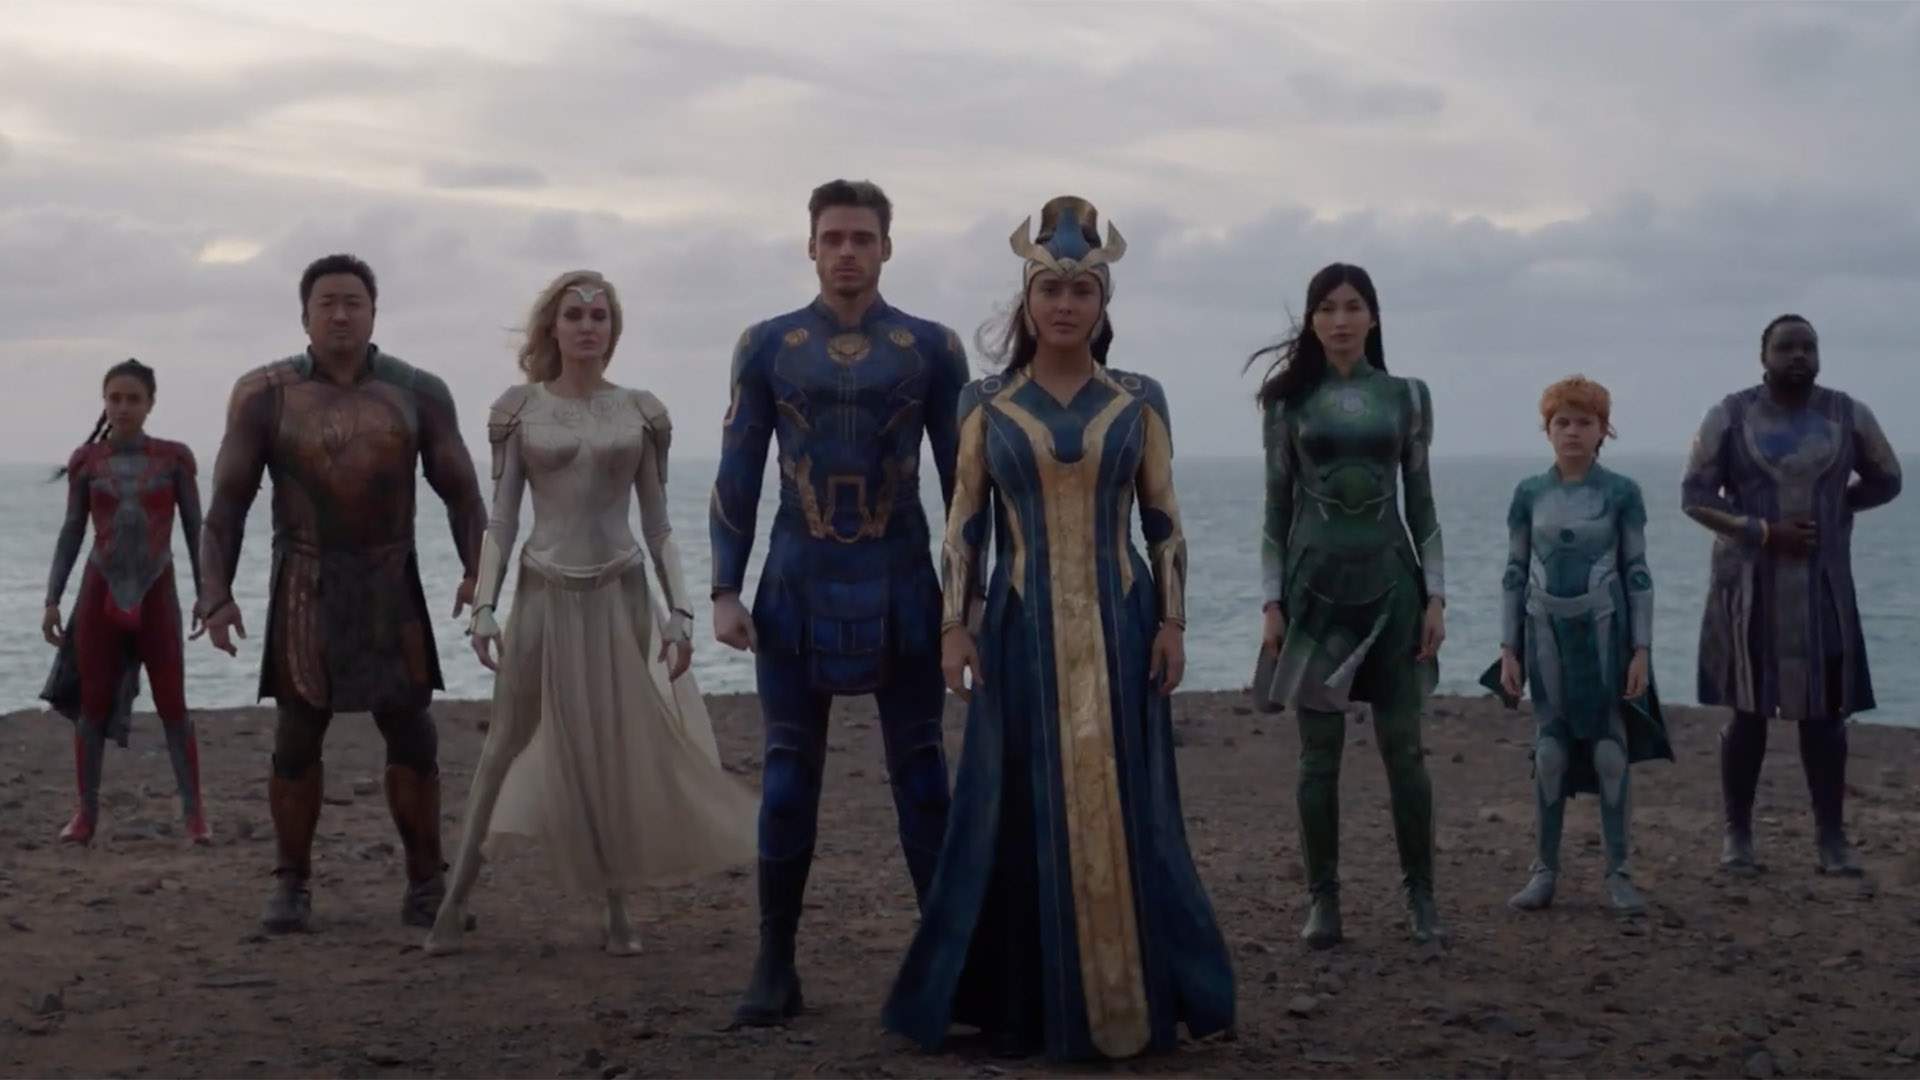 Marvel Reveals Its Next Team of Superheroes in the First Trailer for Chloe Zhao's 'Eternals'